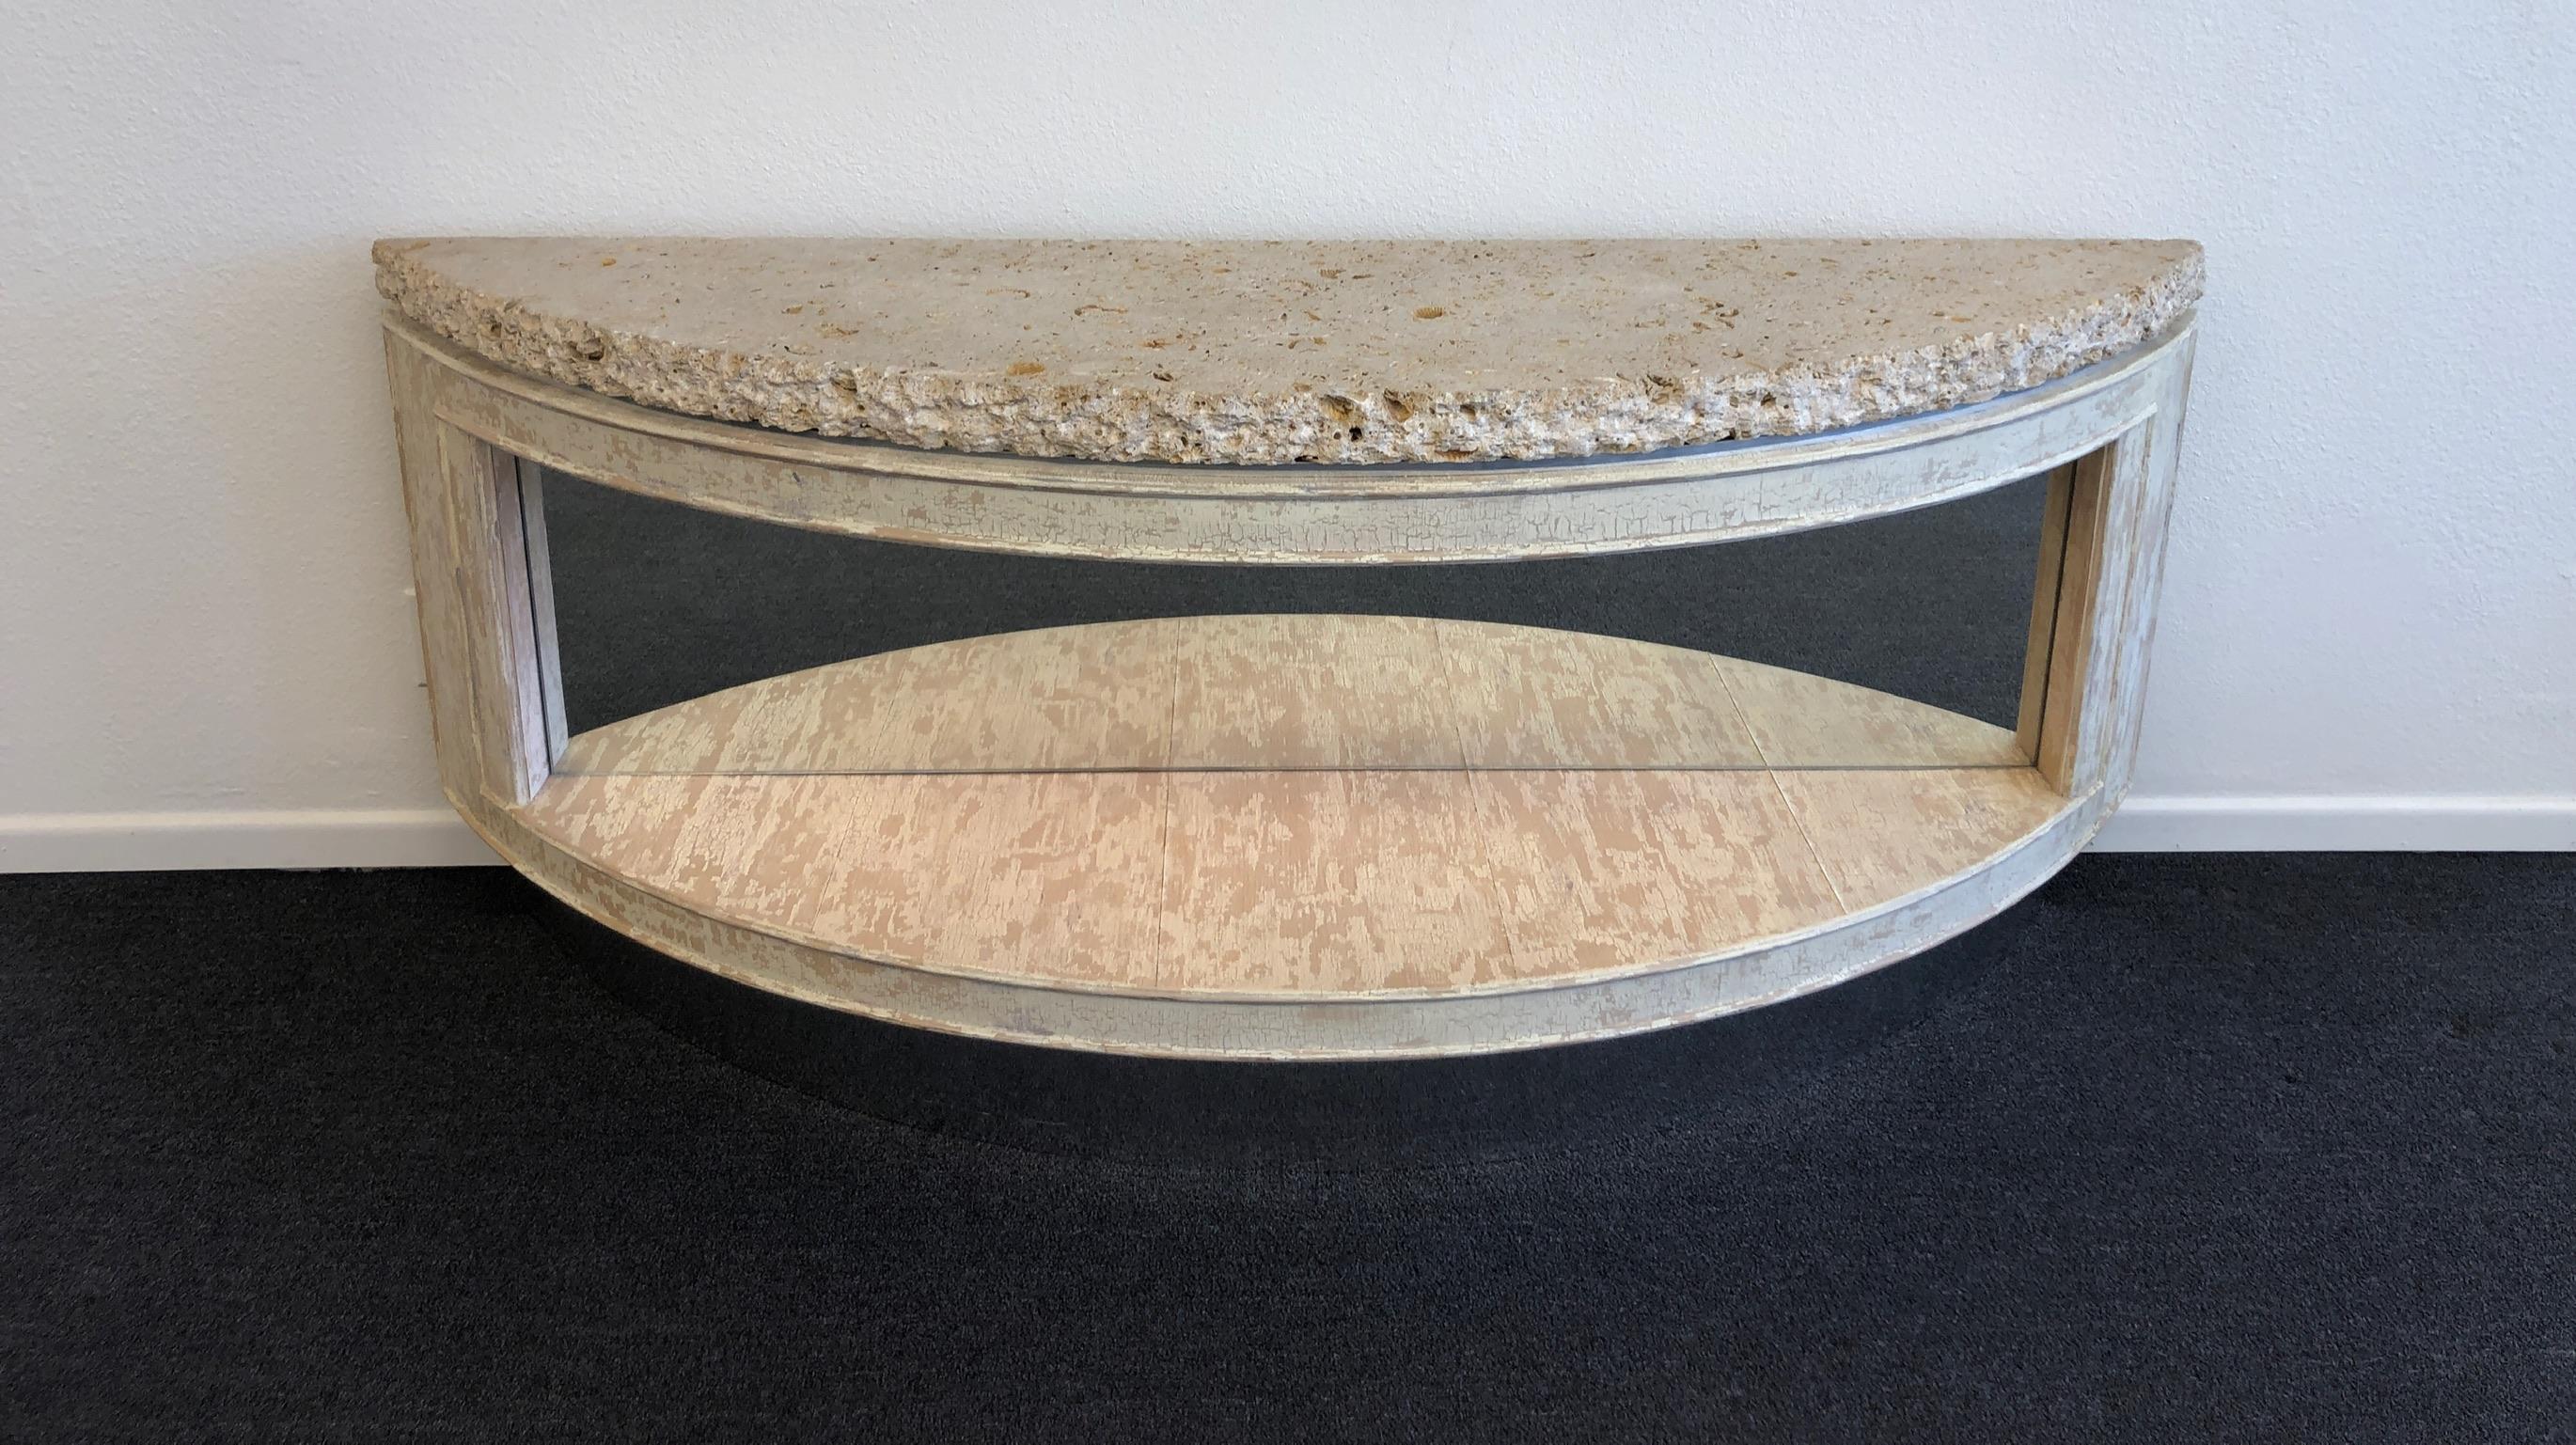 Fossil Shell Stone Top Demilune Two-Tier Console Table by Steve Chase For Sale 1